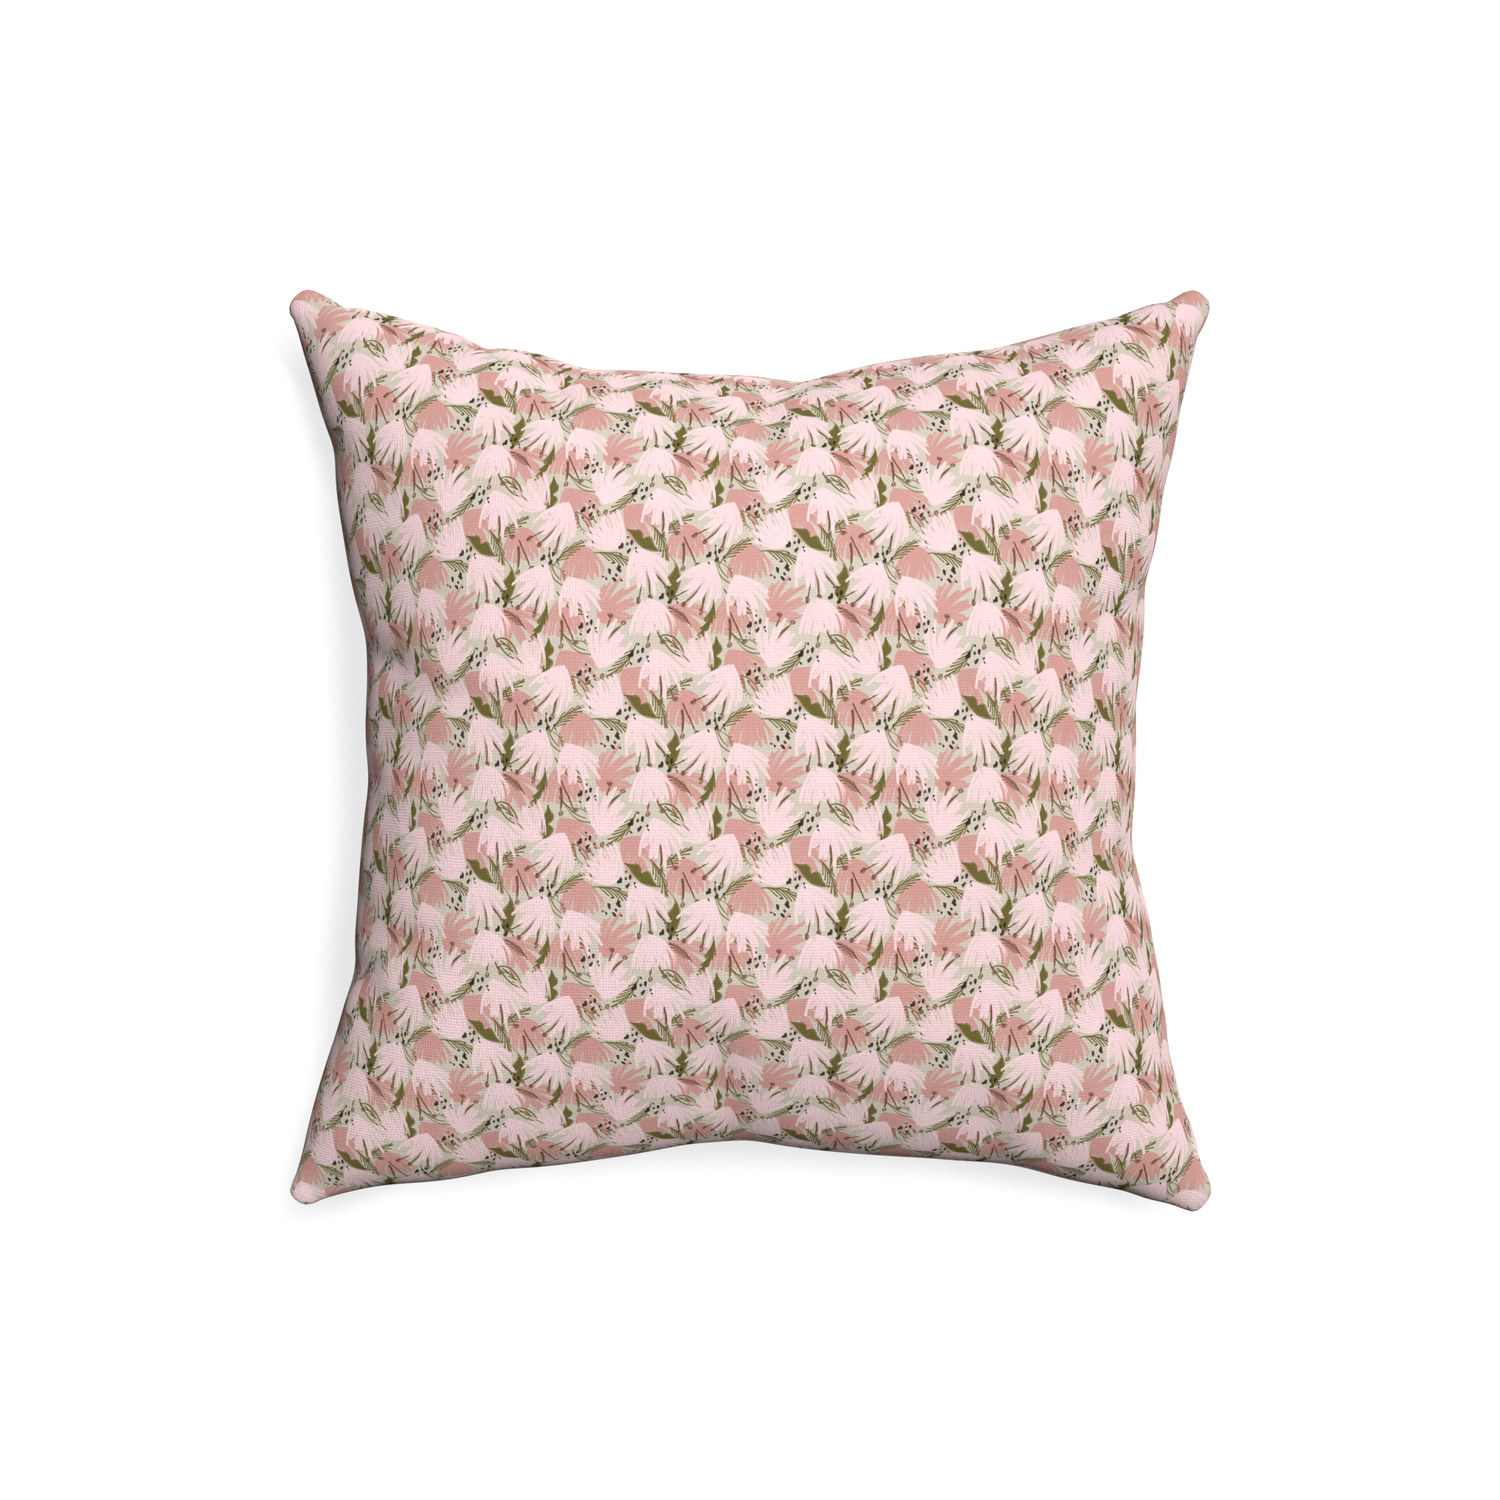 20-square eden pink custom pink floralpillow with none on white background